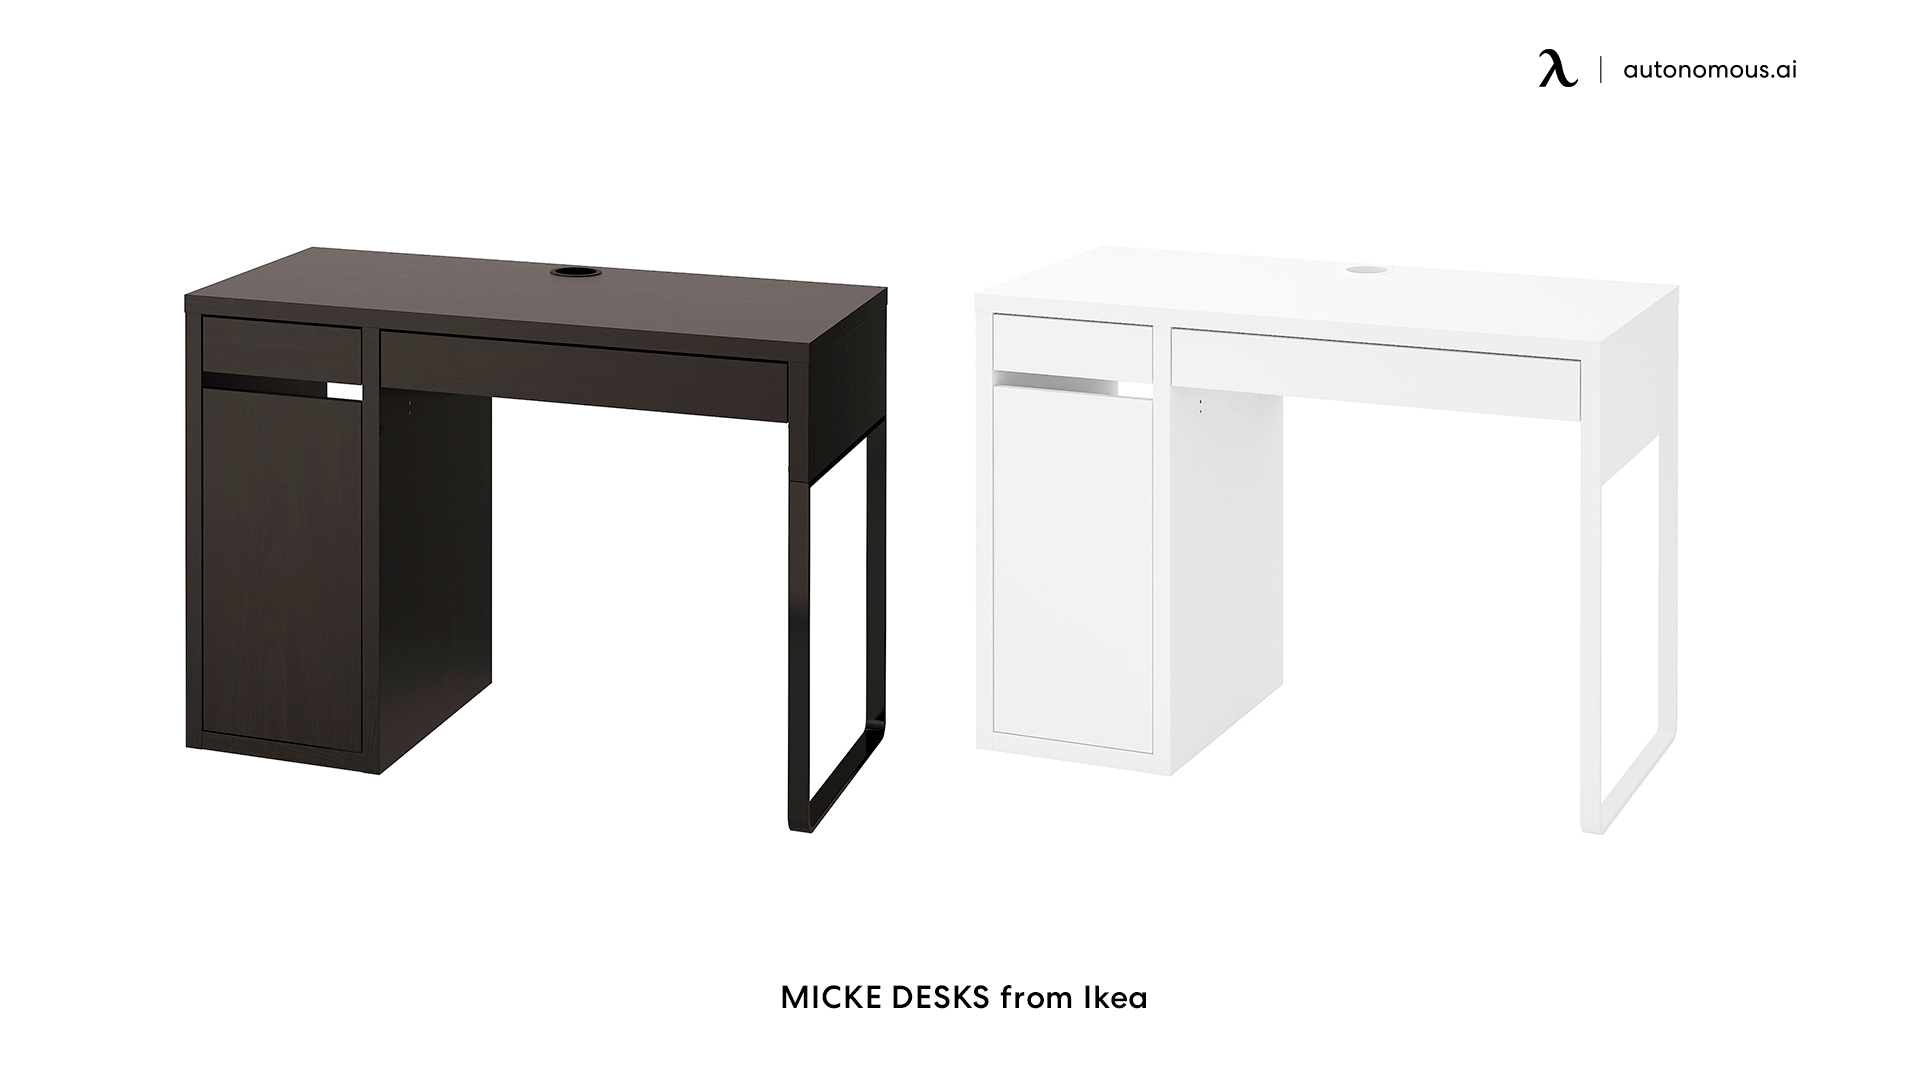 MICKE work from home desks from Ikea